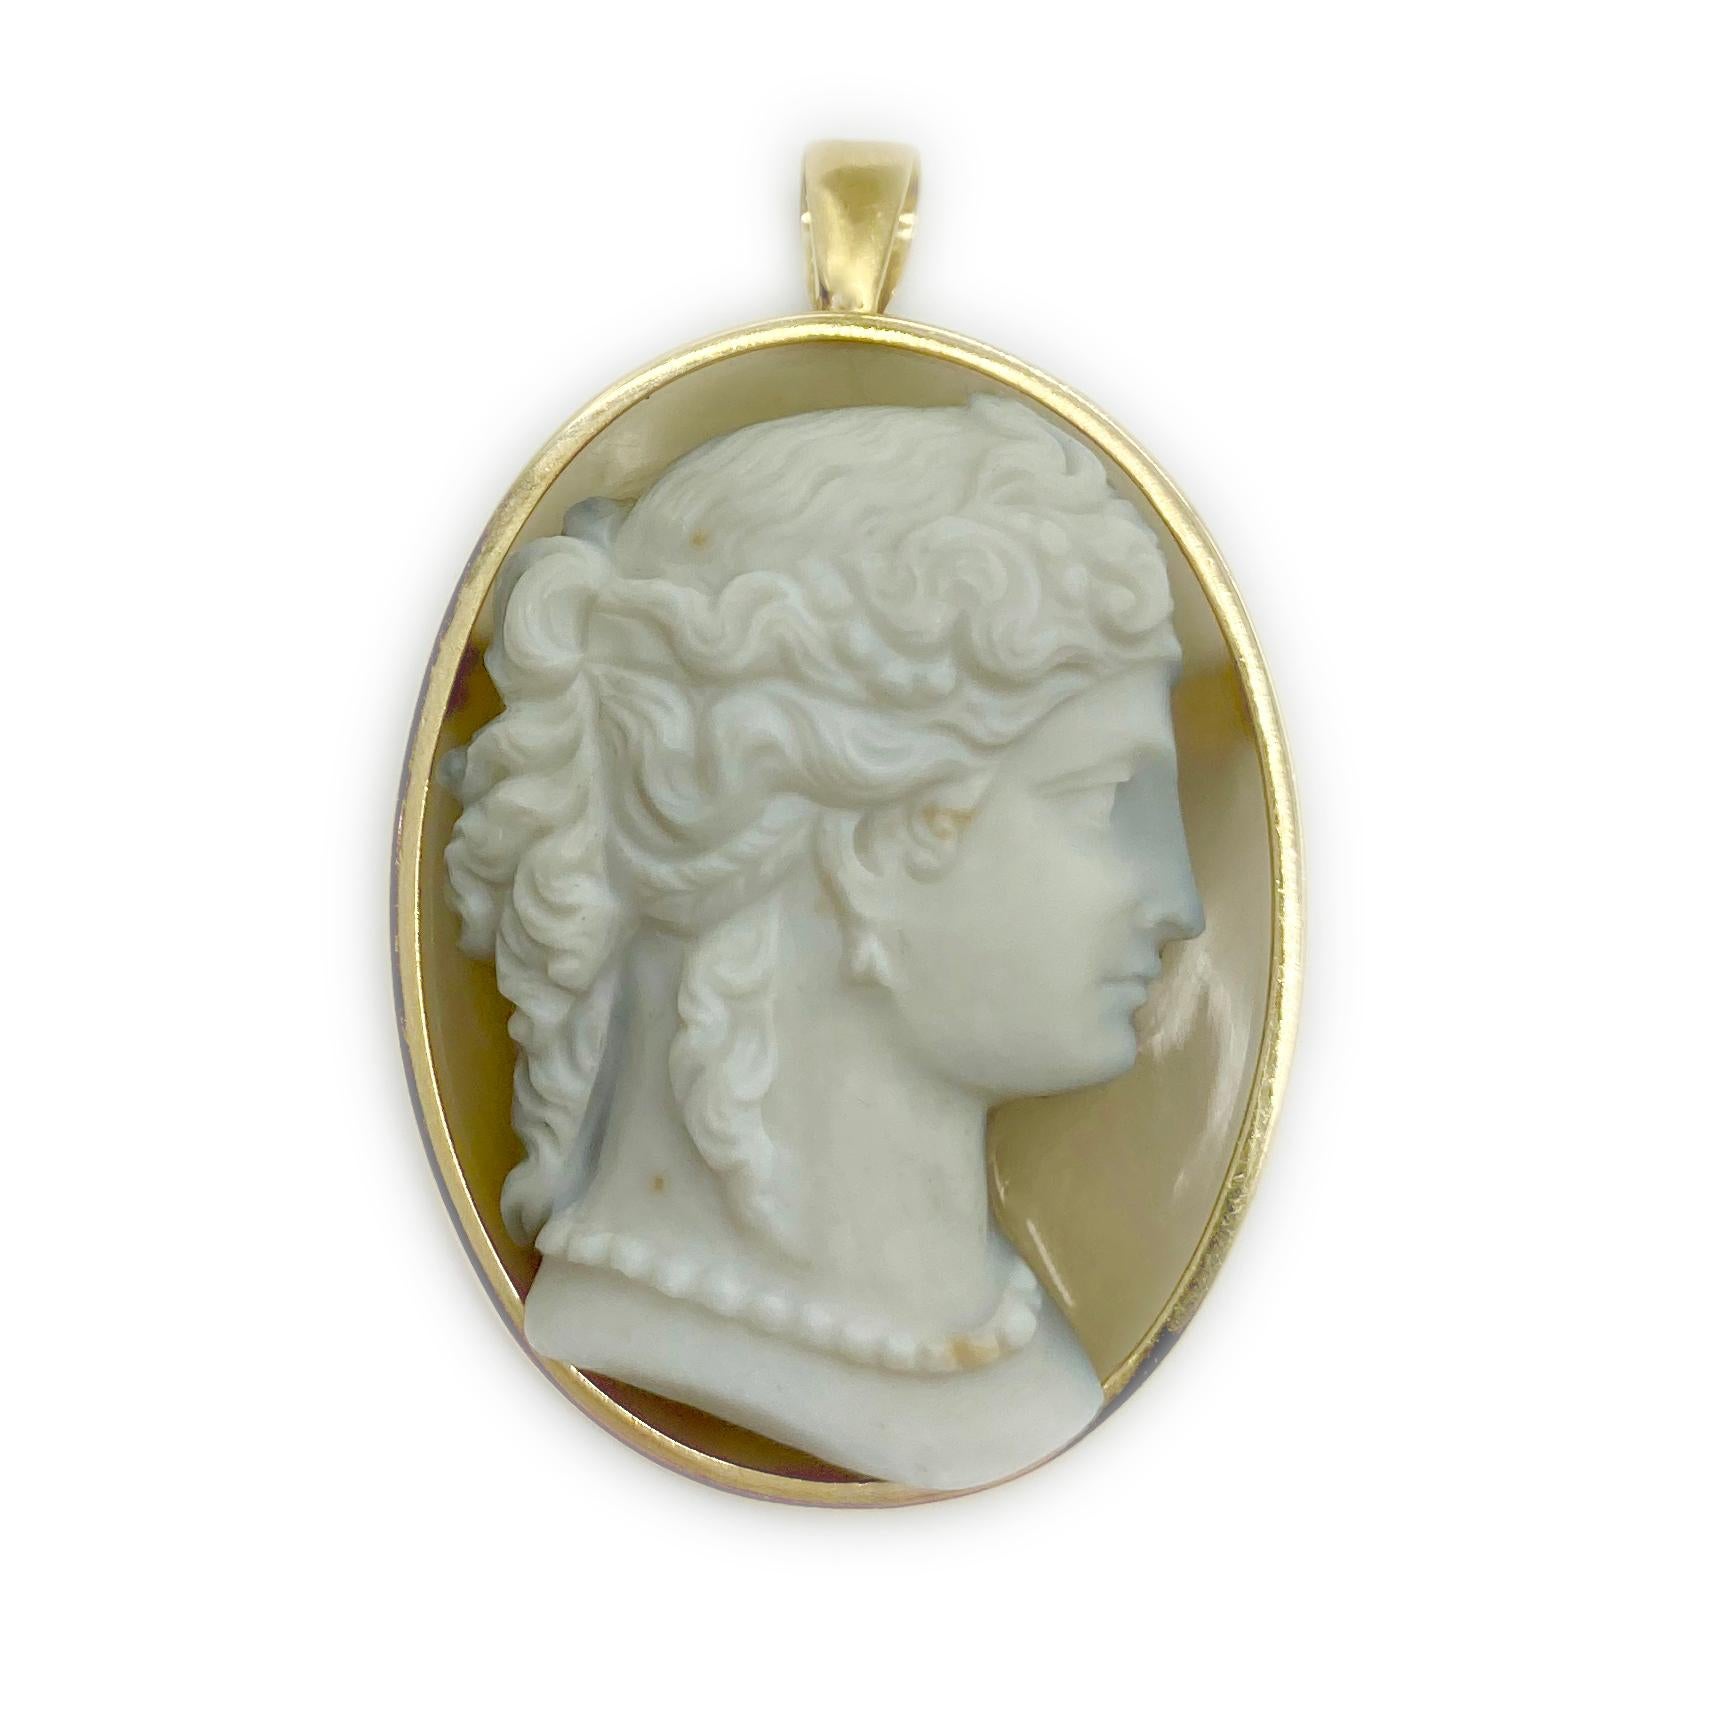 Neoclassical Antique Agate Cameo Pendant Brooch For Sale